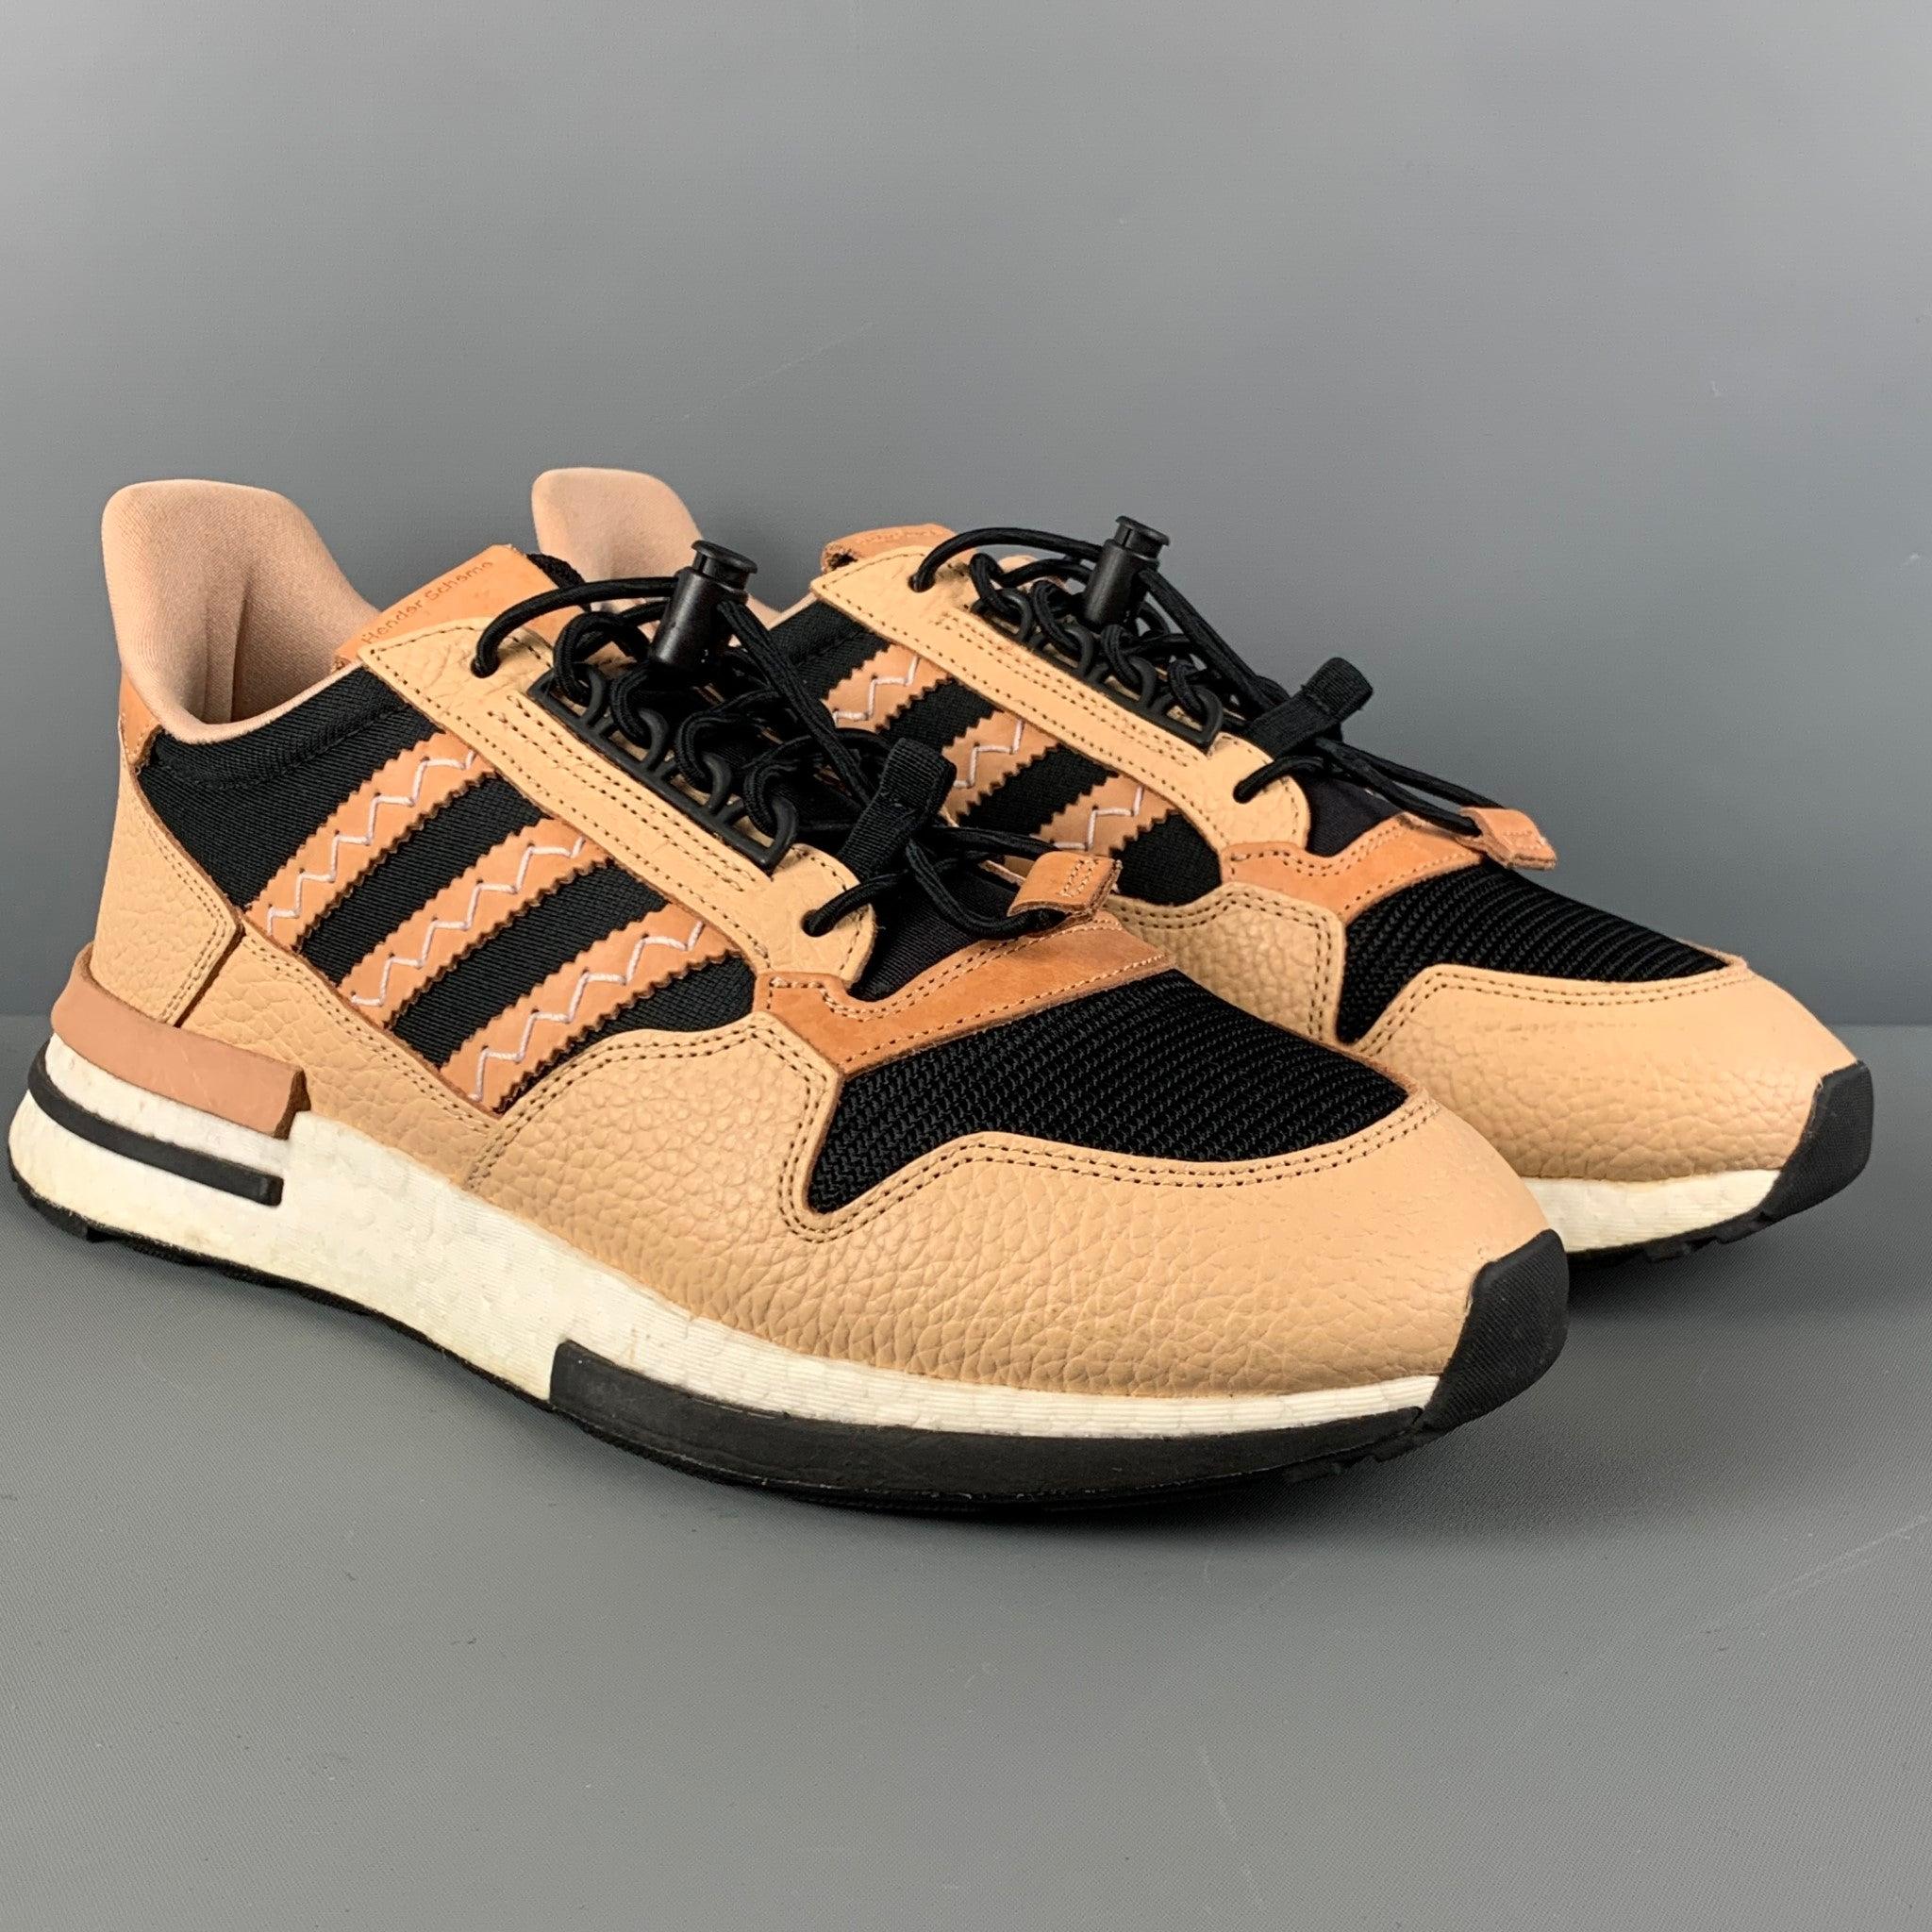 ADIDAS X HENDER SCHEME sneakers comes in a tan & black mixed materials featuring a low-top style, rubber sole, and a adjustable elastic lace up closure. Includes box. Very Good
Pre-Owned Condition. 

Marked:   10.5Outsole: 12.5 inches  x 4.5 inches